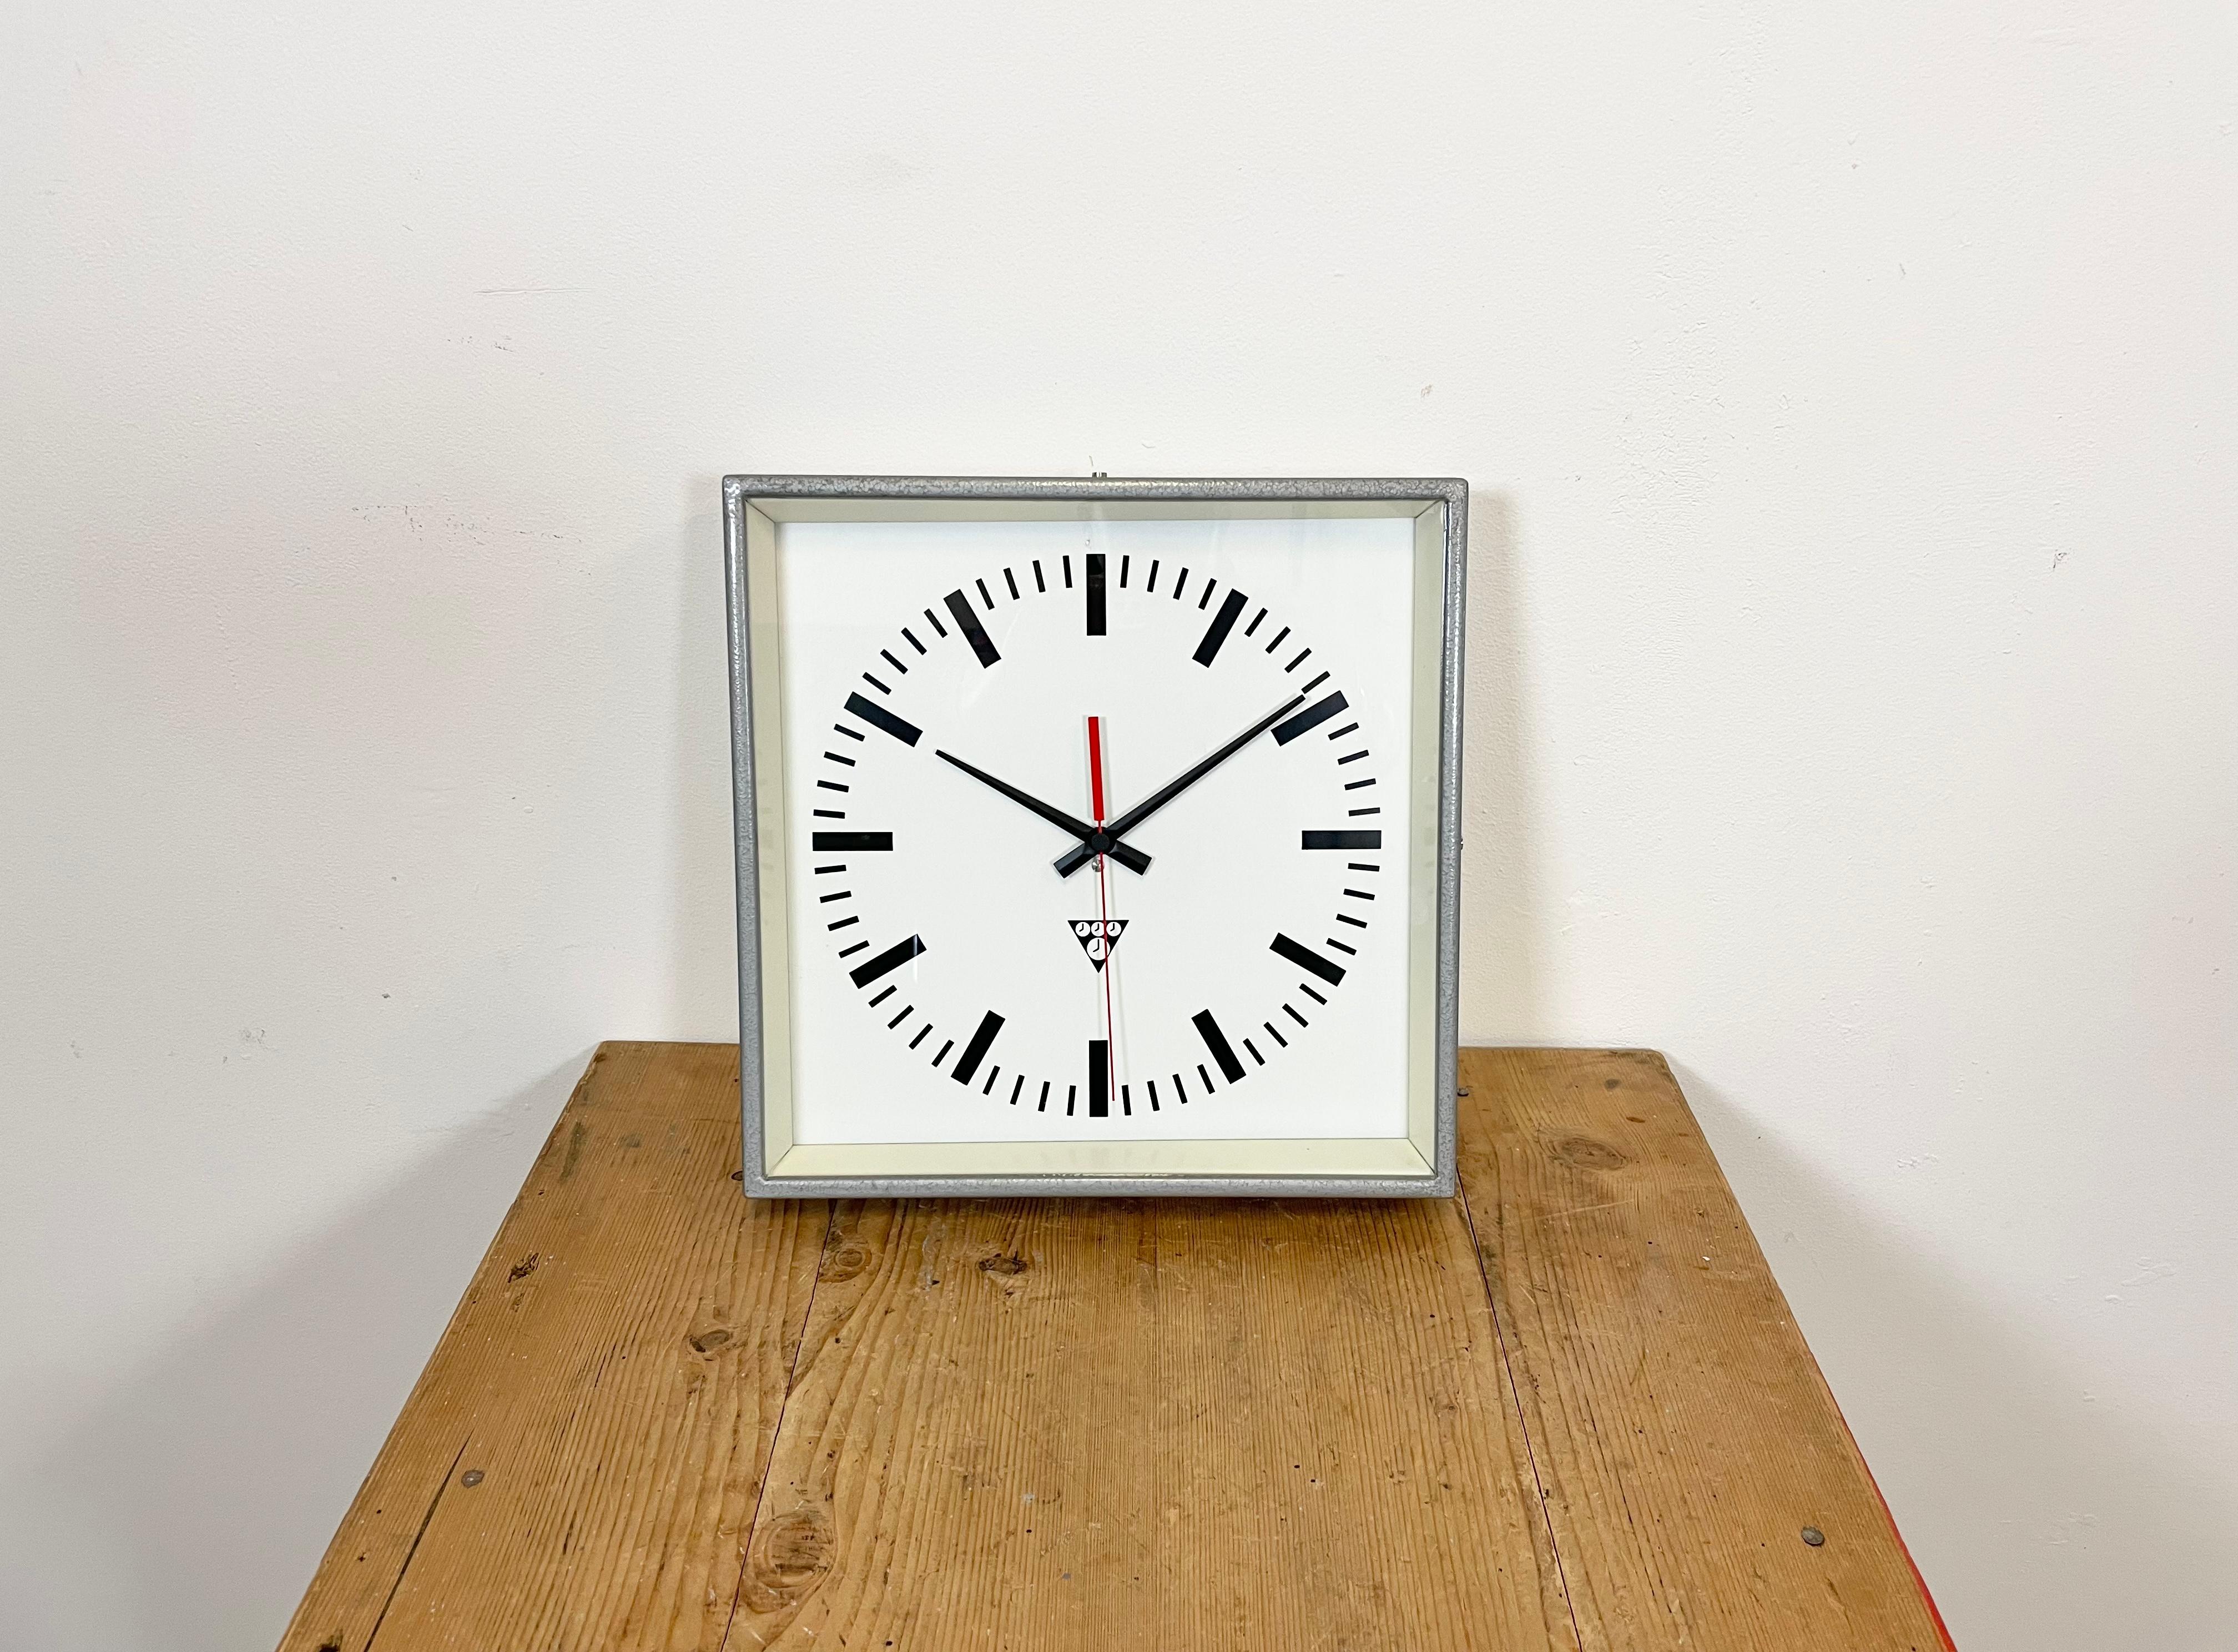 - Clock made by Pragotron in former Czechoslovakia during the 1970s 
- Was used in factories, schools and railway stations 
- Grey hammerpaint metal body 
- Aluminium dial and hands 
- Clear glass cover 
- This item has been converted into a